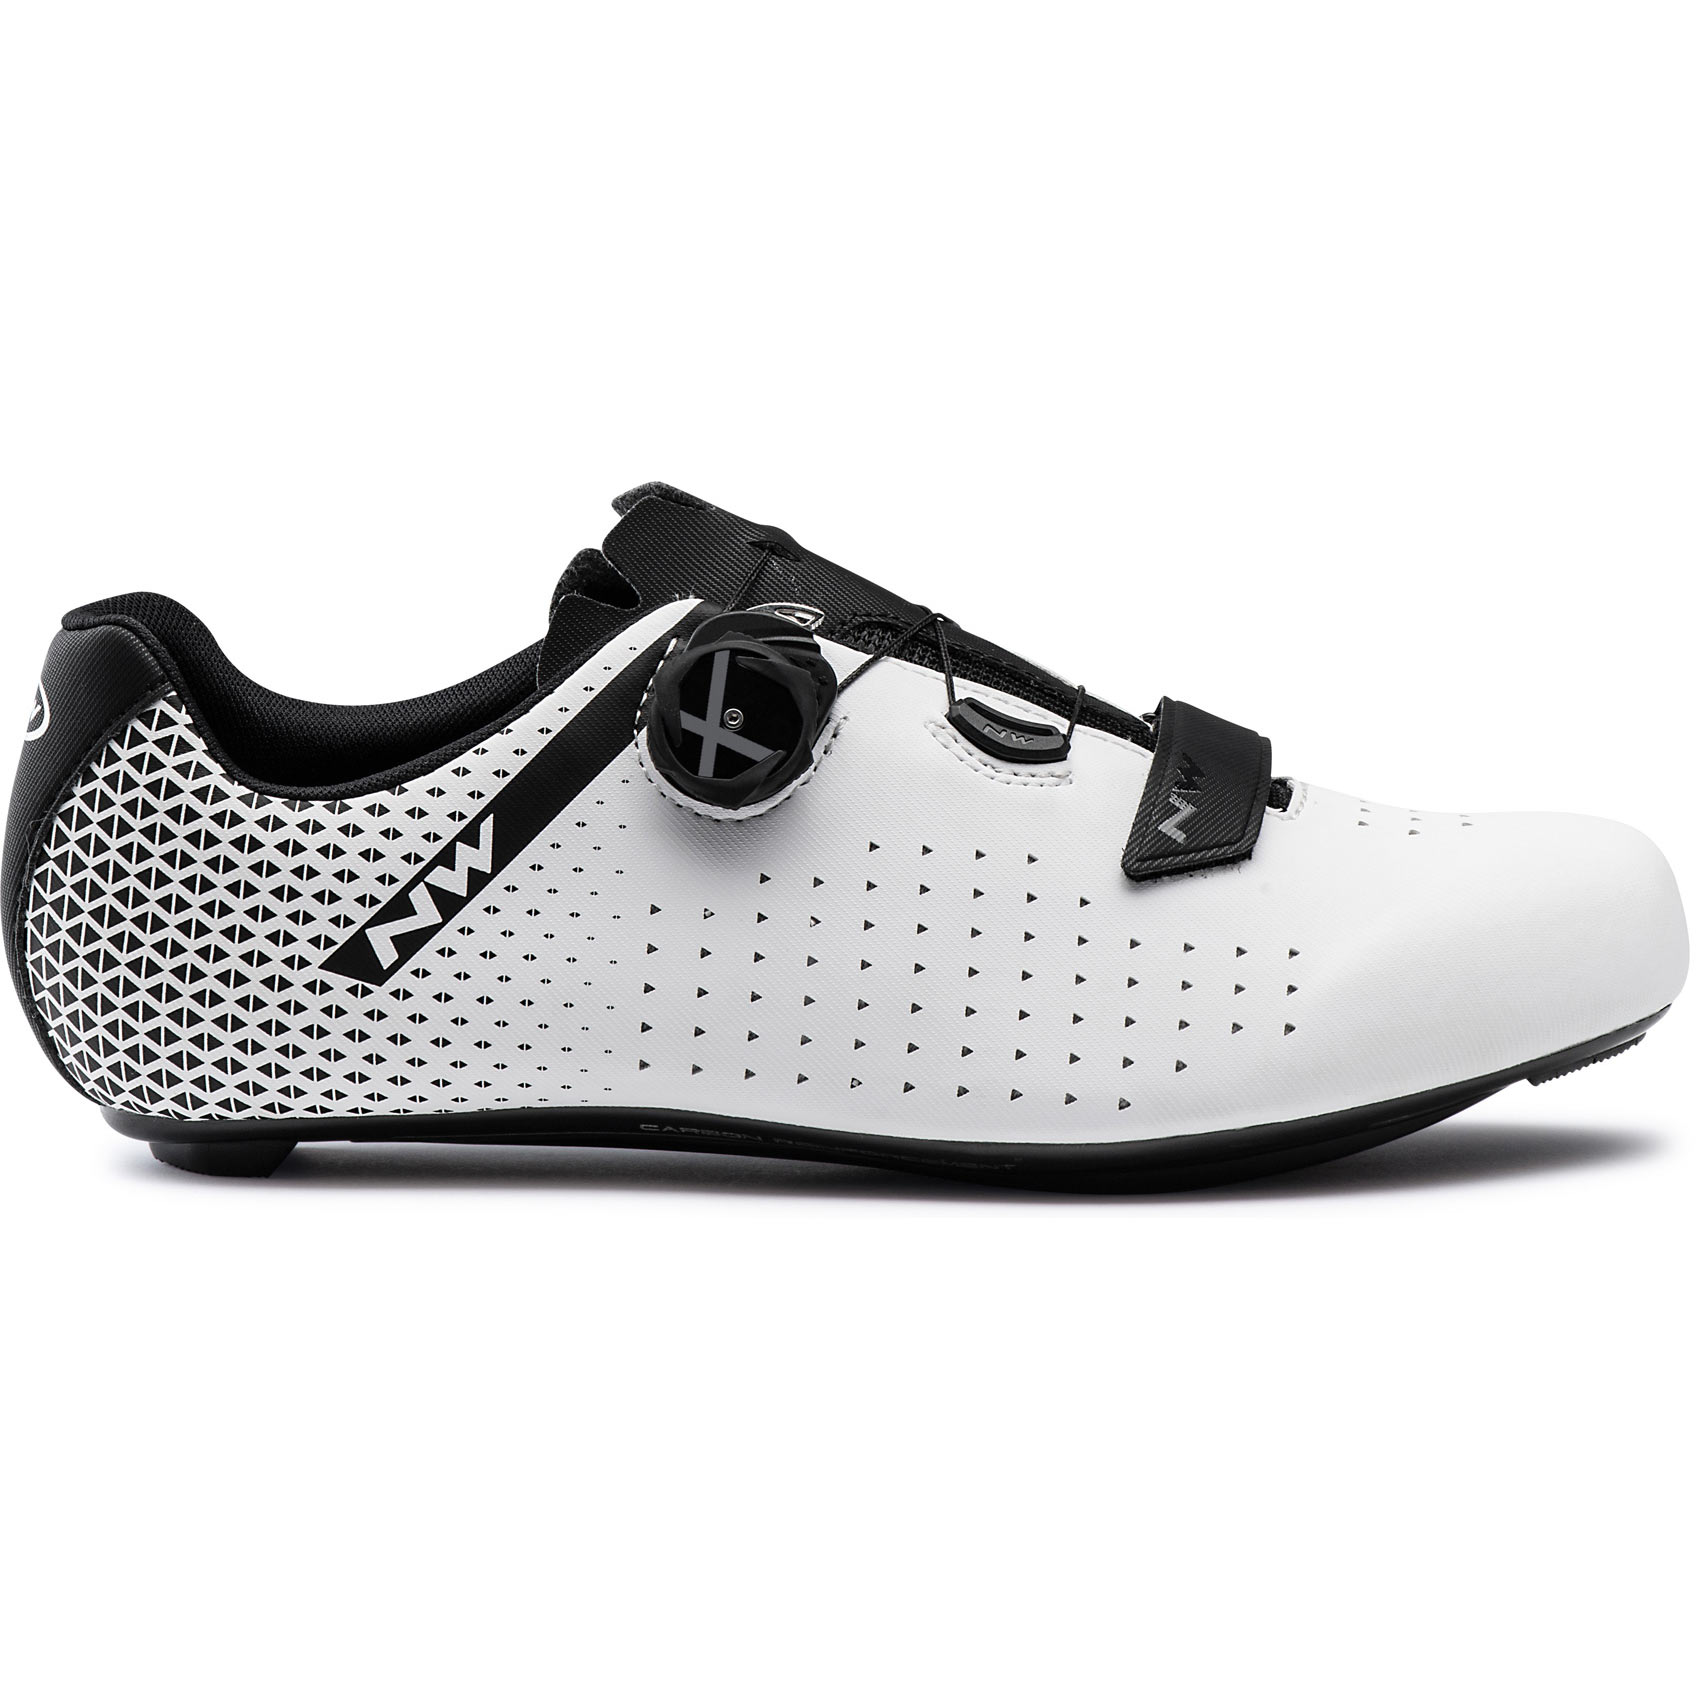 Image of Northwave Core Plus 2 Road Shoes - white/black 51